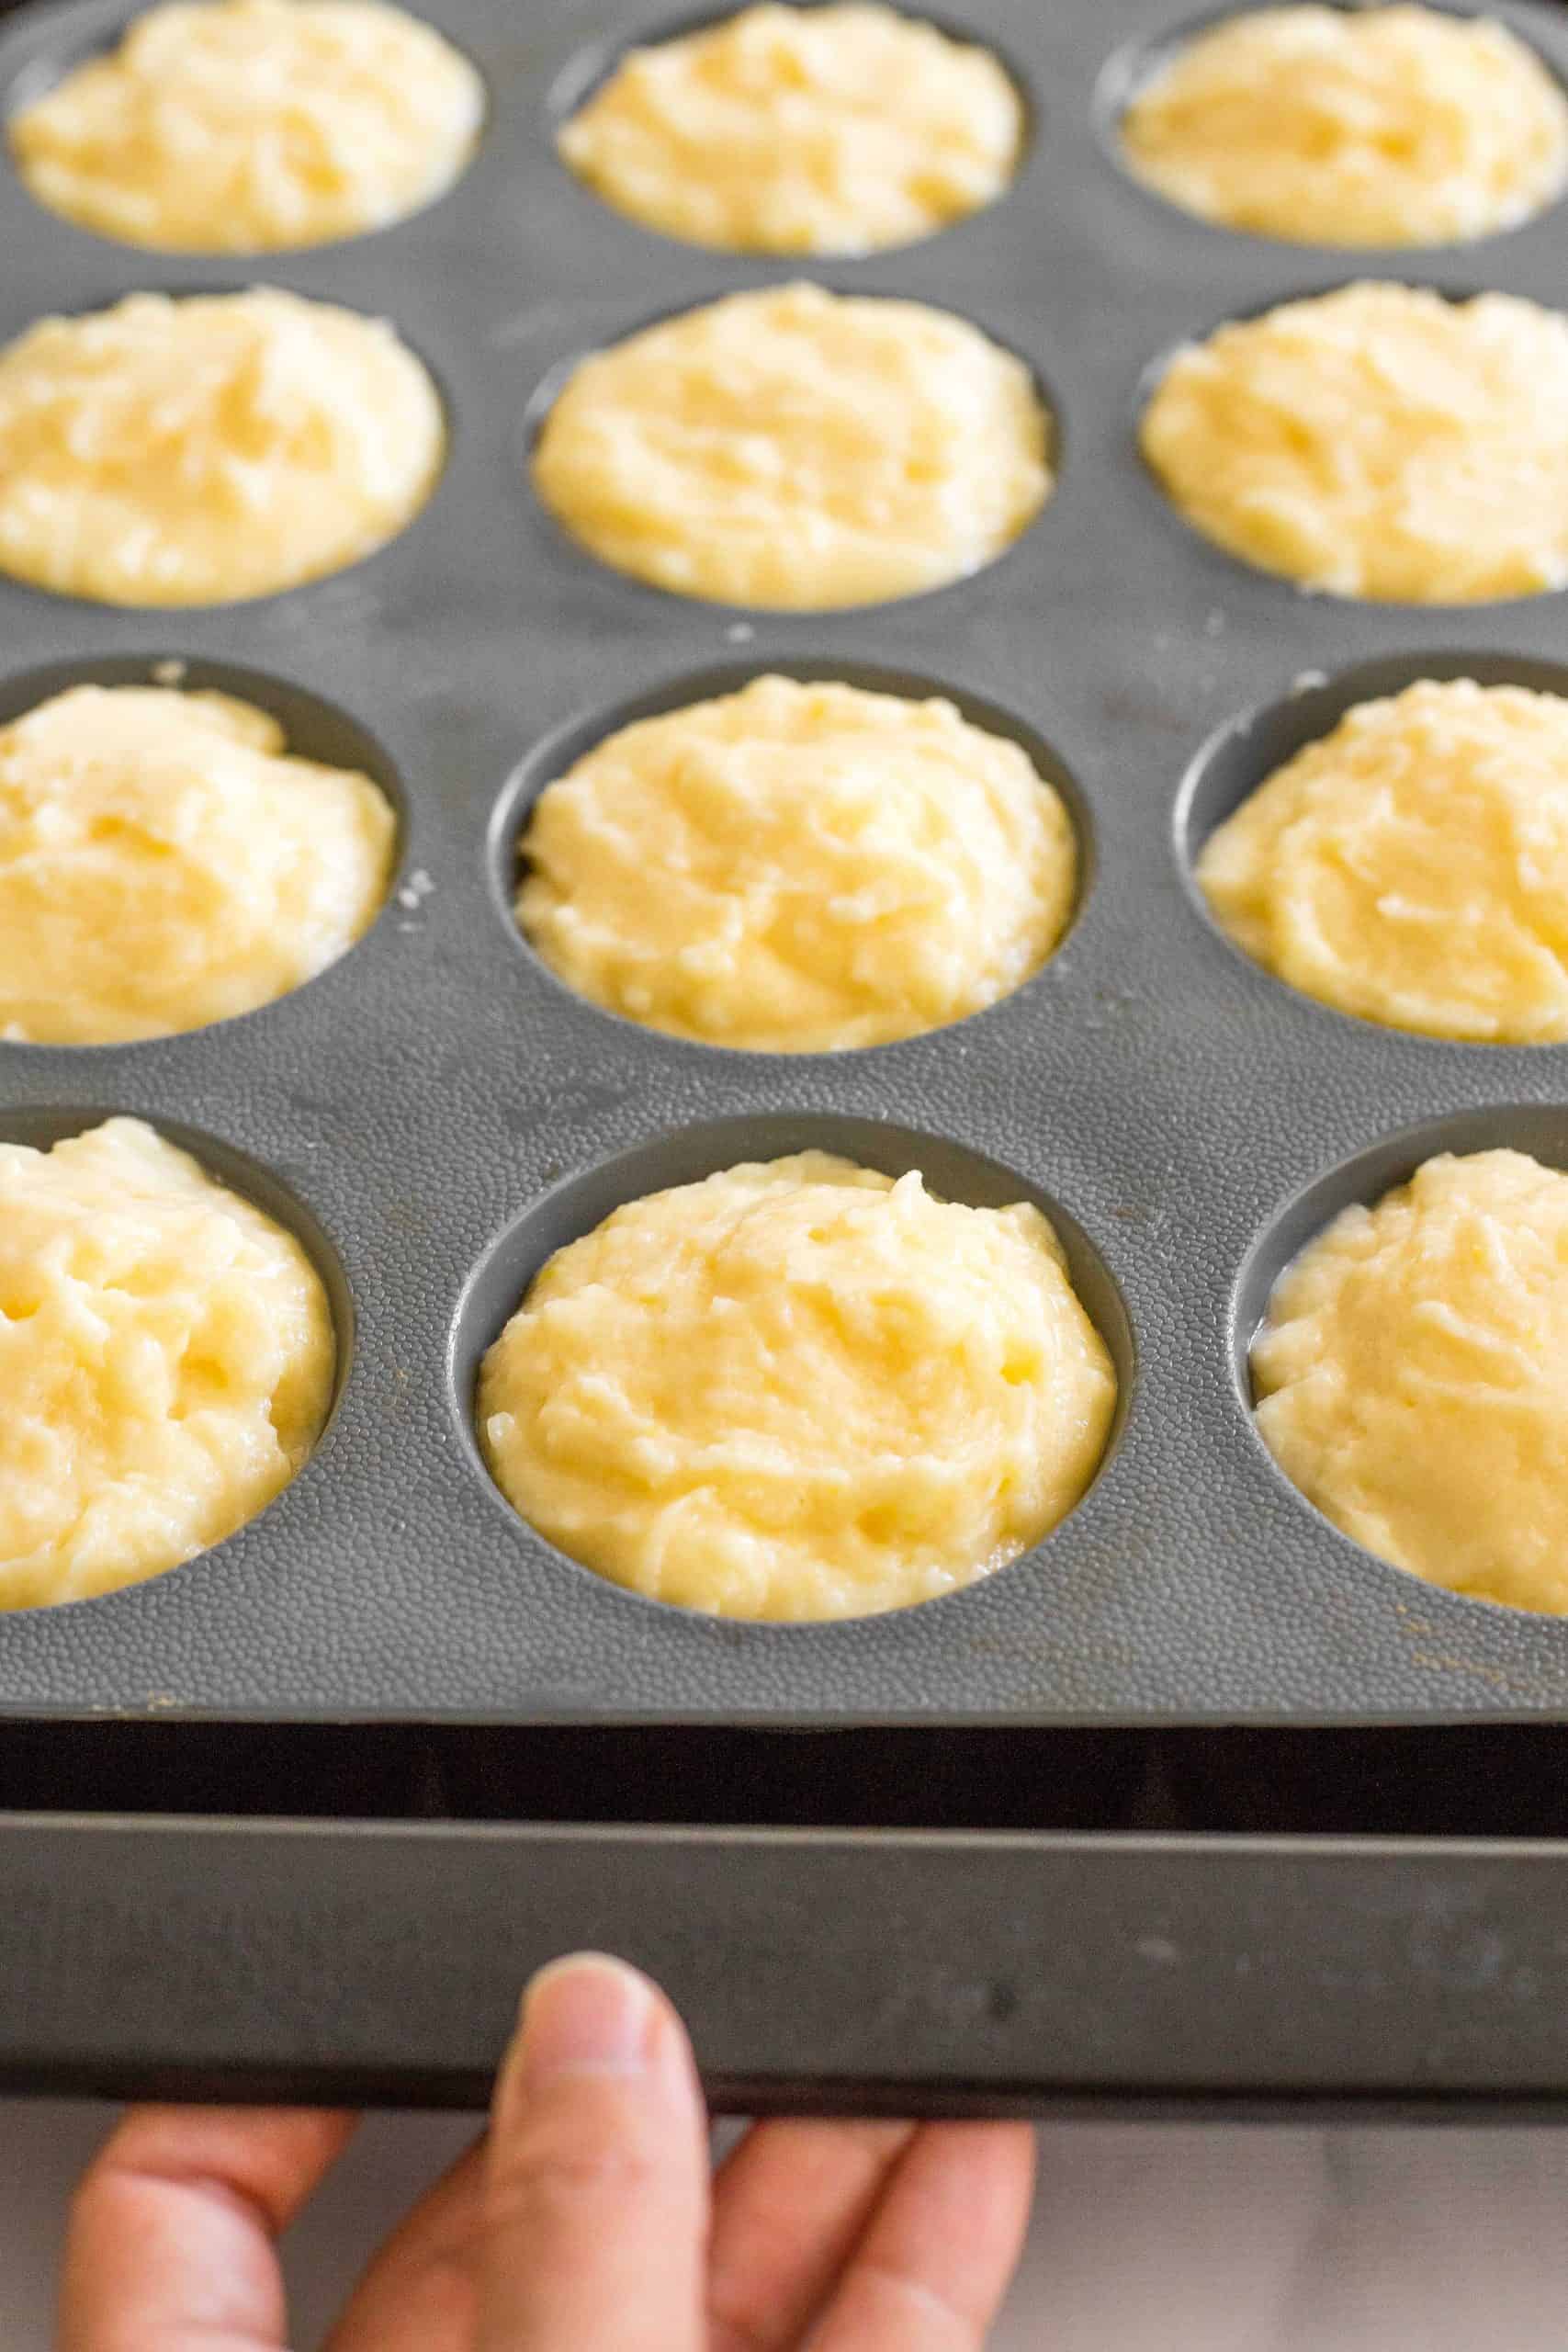 Muffin batter in a silicon muffin mold.